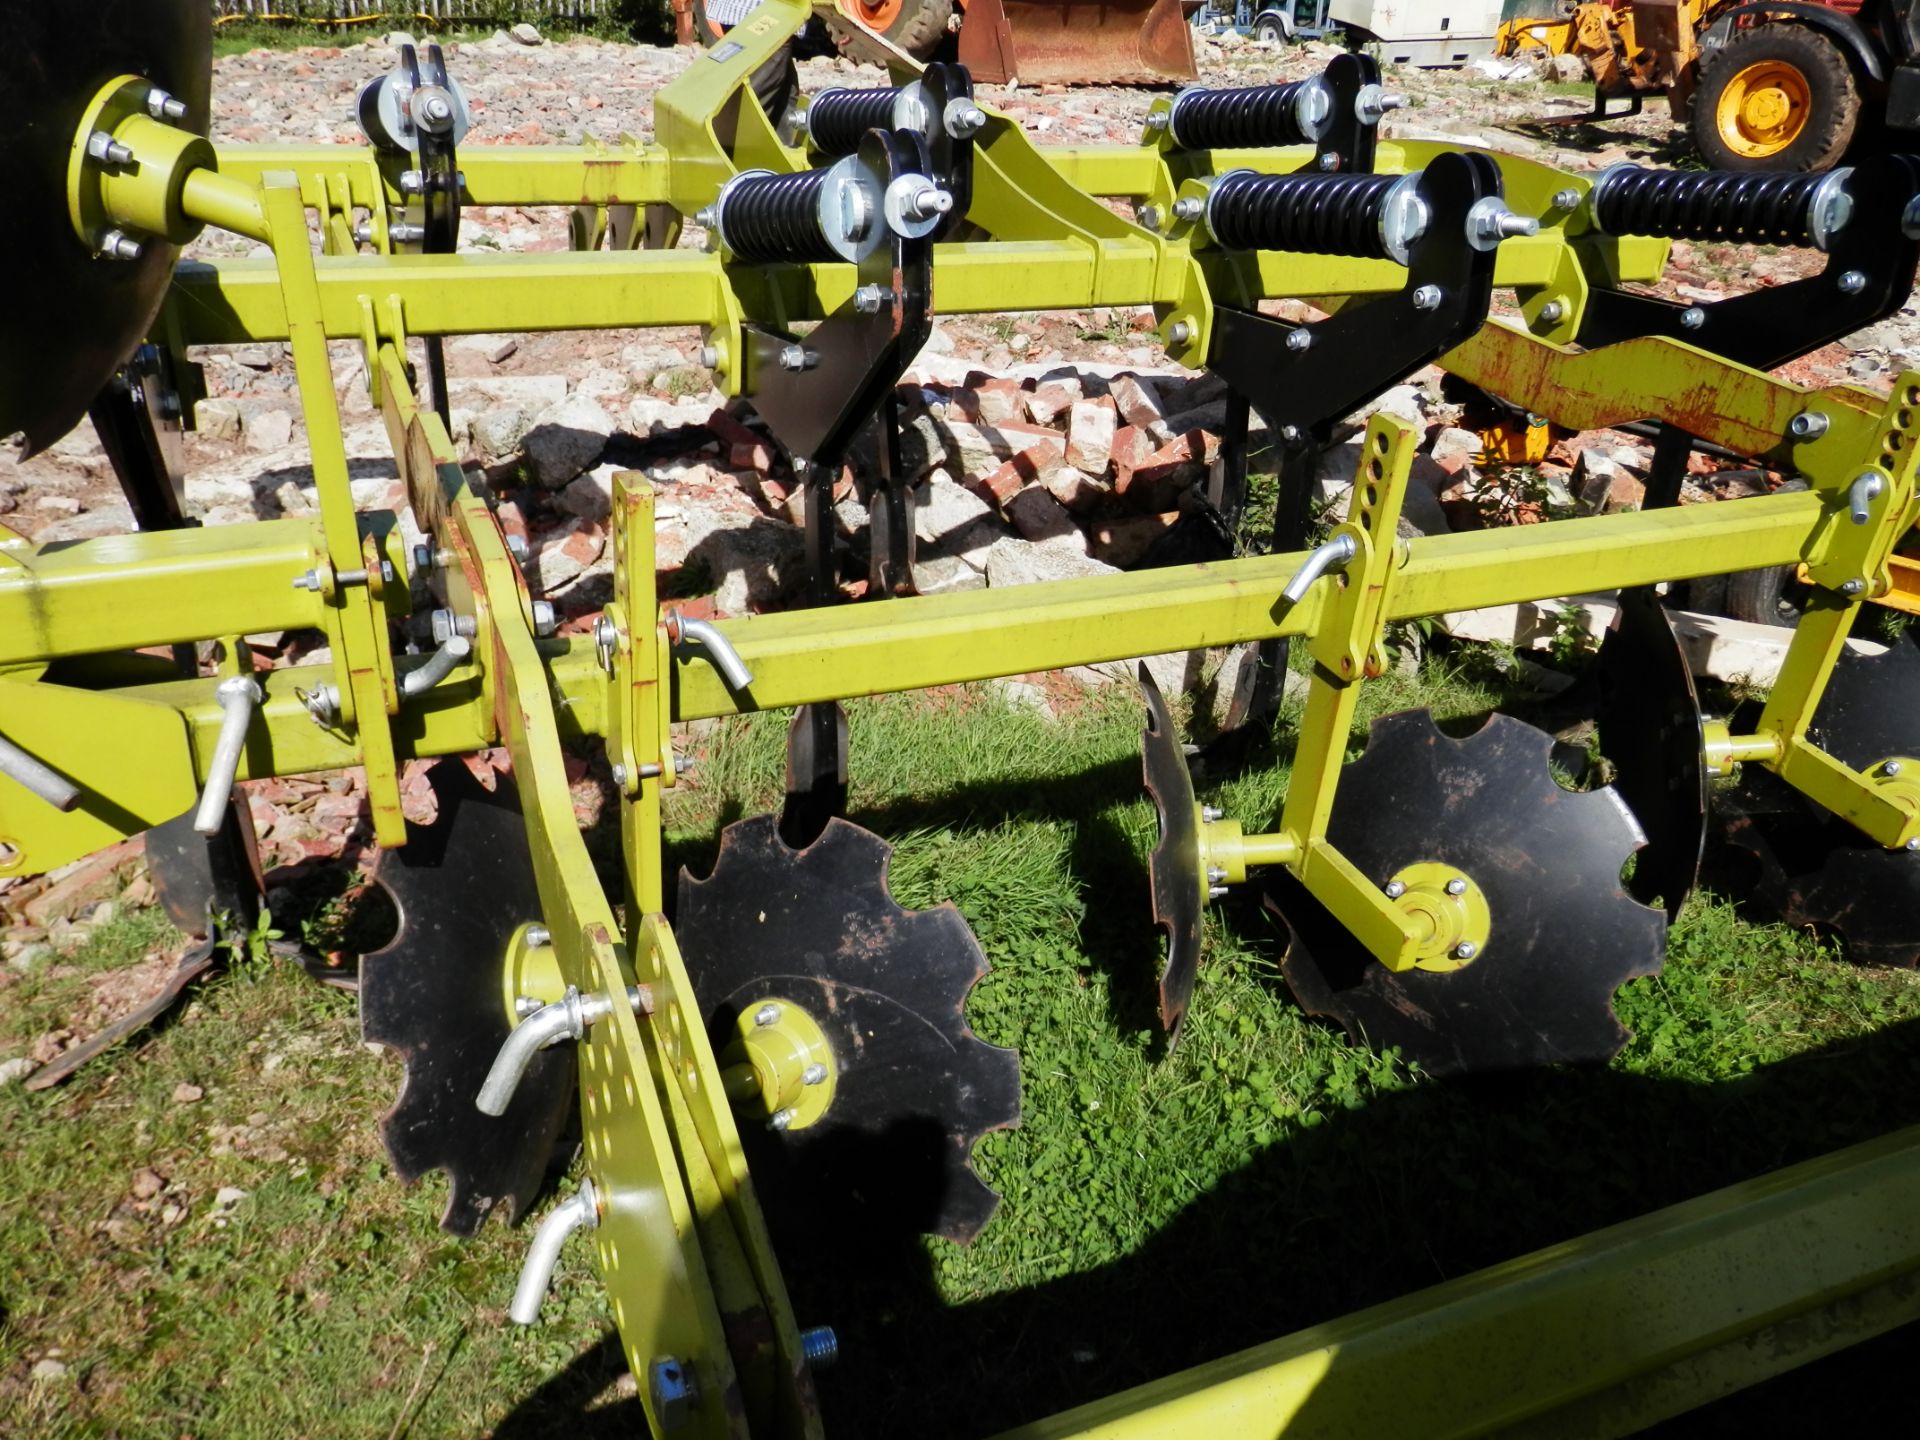 2014 UNUSED/NEW TERESA ASG-30 MINIMUM CULTIVATION TRACTOR ATTACHMENT (LEMKIN PARTS) POLISH MADE. - Image 6 of 7